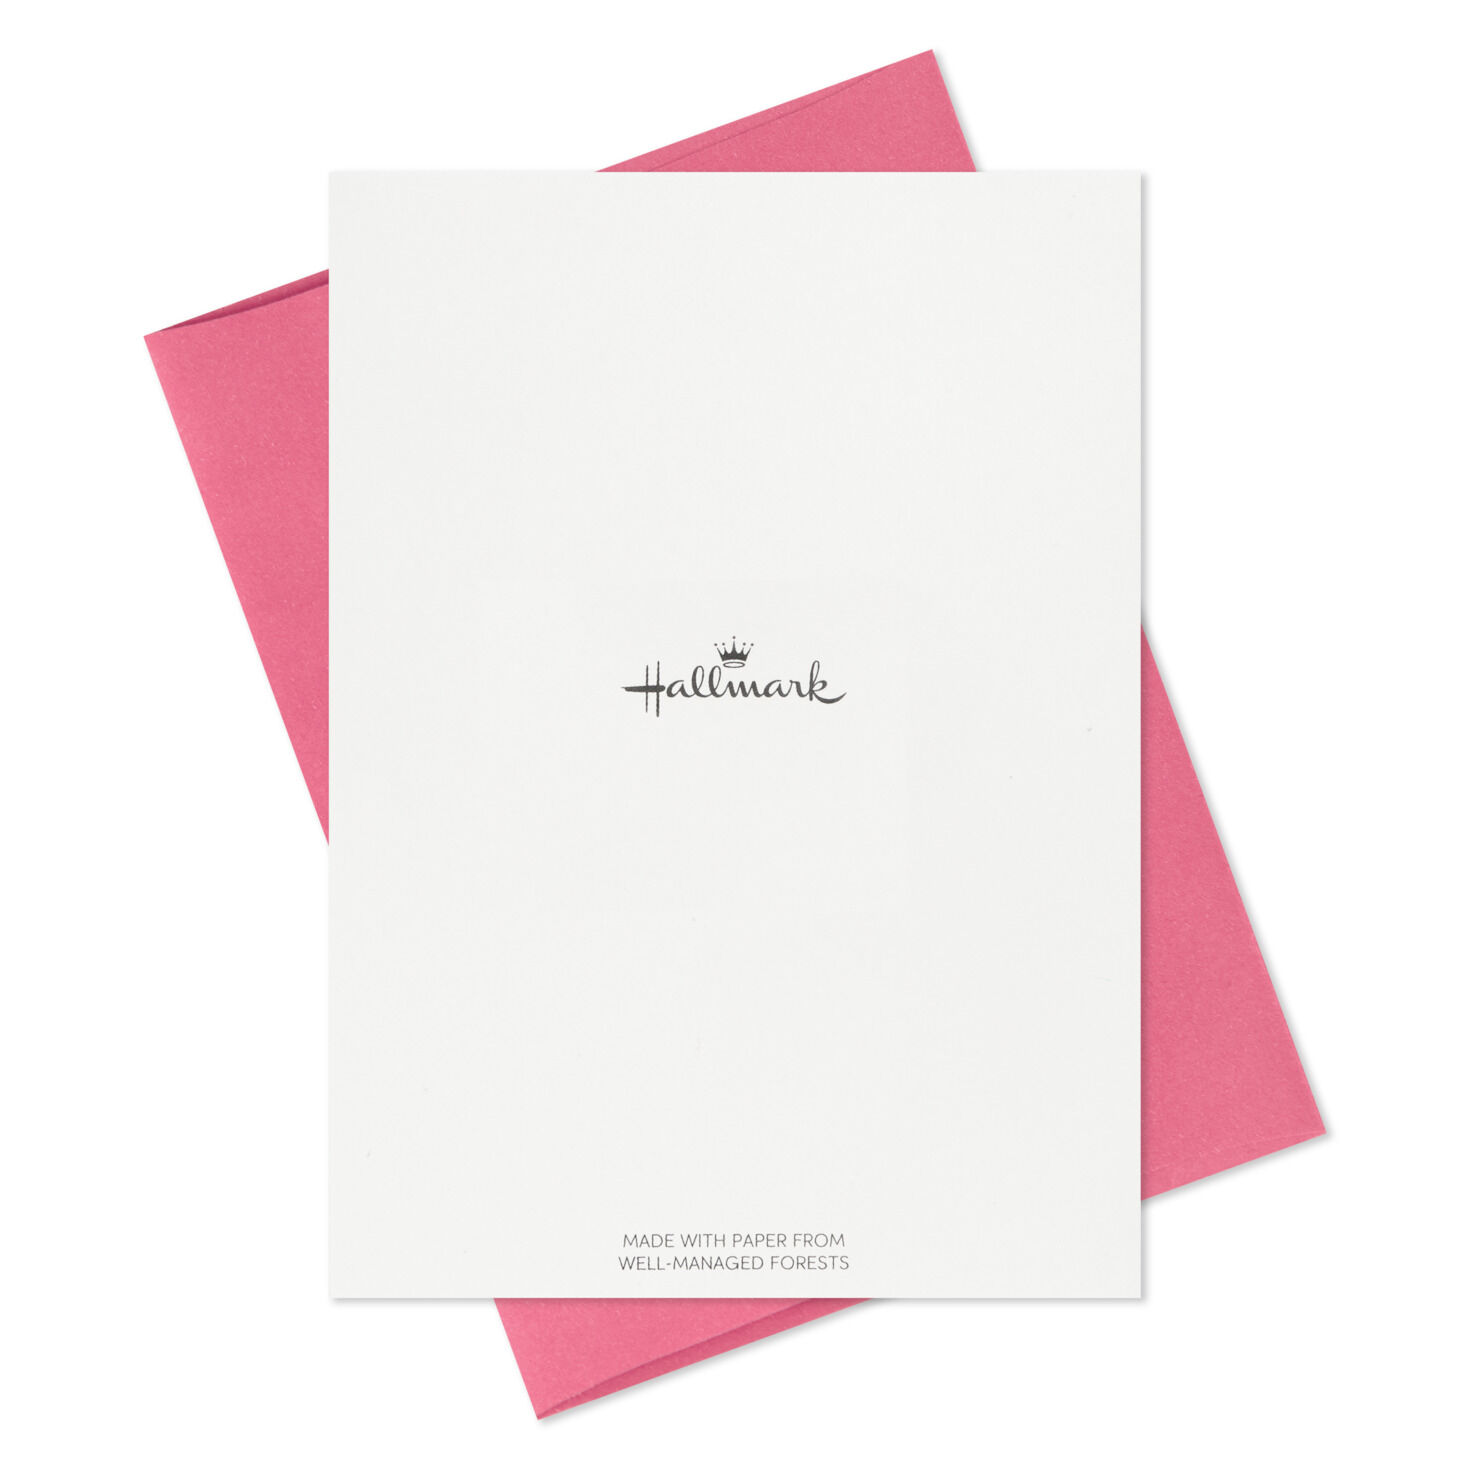 You Can't Help But Be Awesome Boxed Blank Note Cards Multipack, Pack of 10 for only USD 9.99 | Hallmark